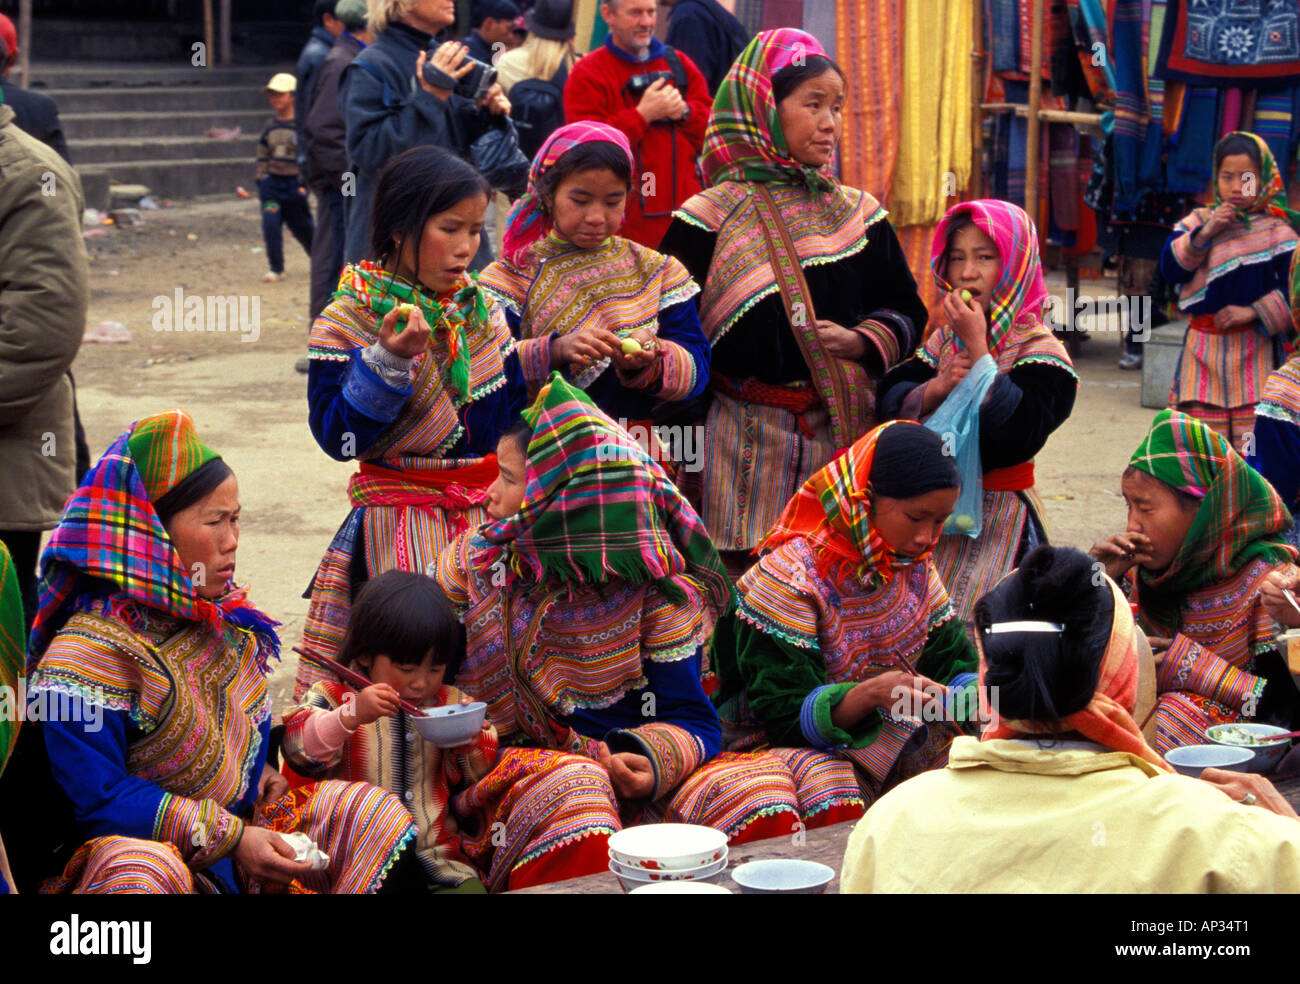 Group of Flower Hmong ethnic minority hill tribe females gathered in Bac Ha village marketplace, north Vietnam Stock Photo